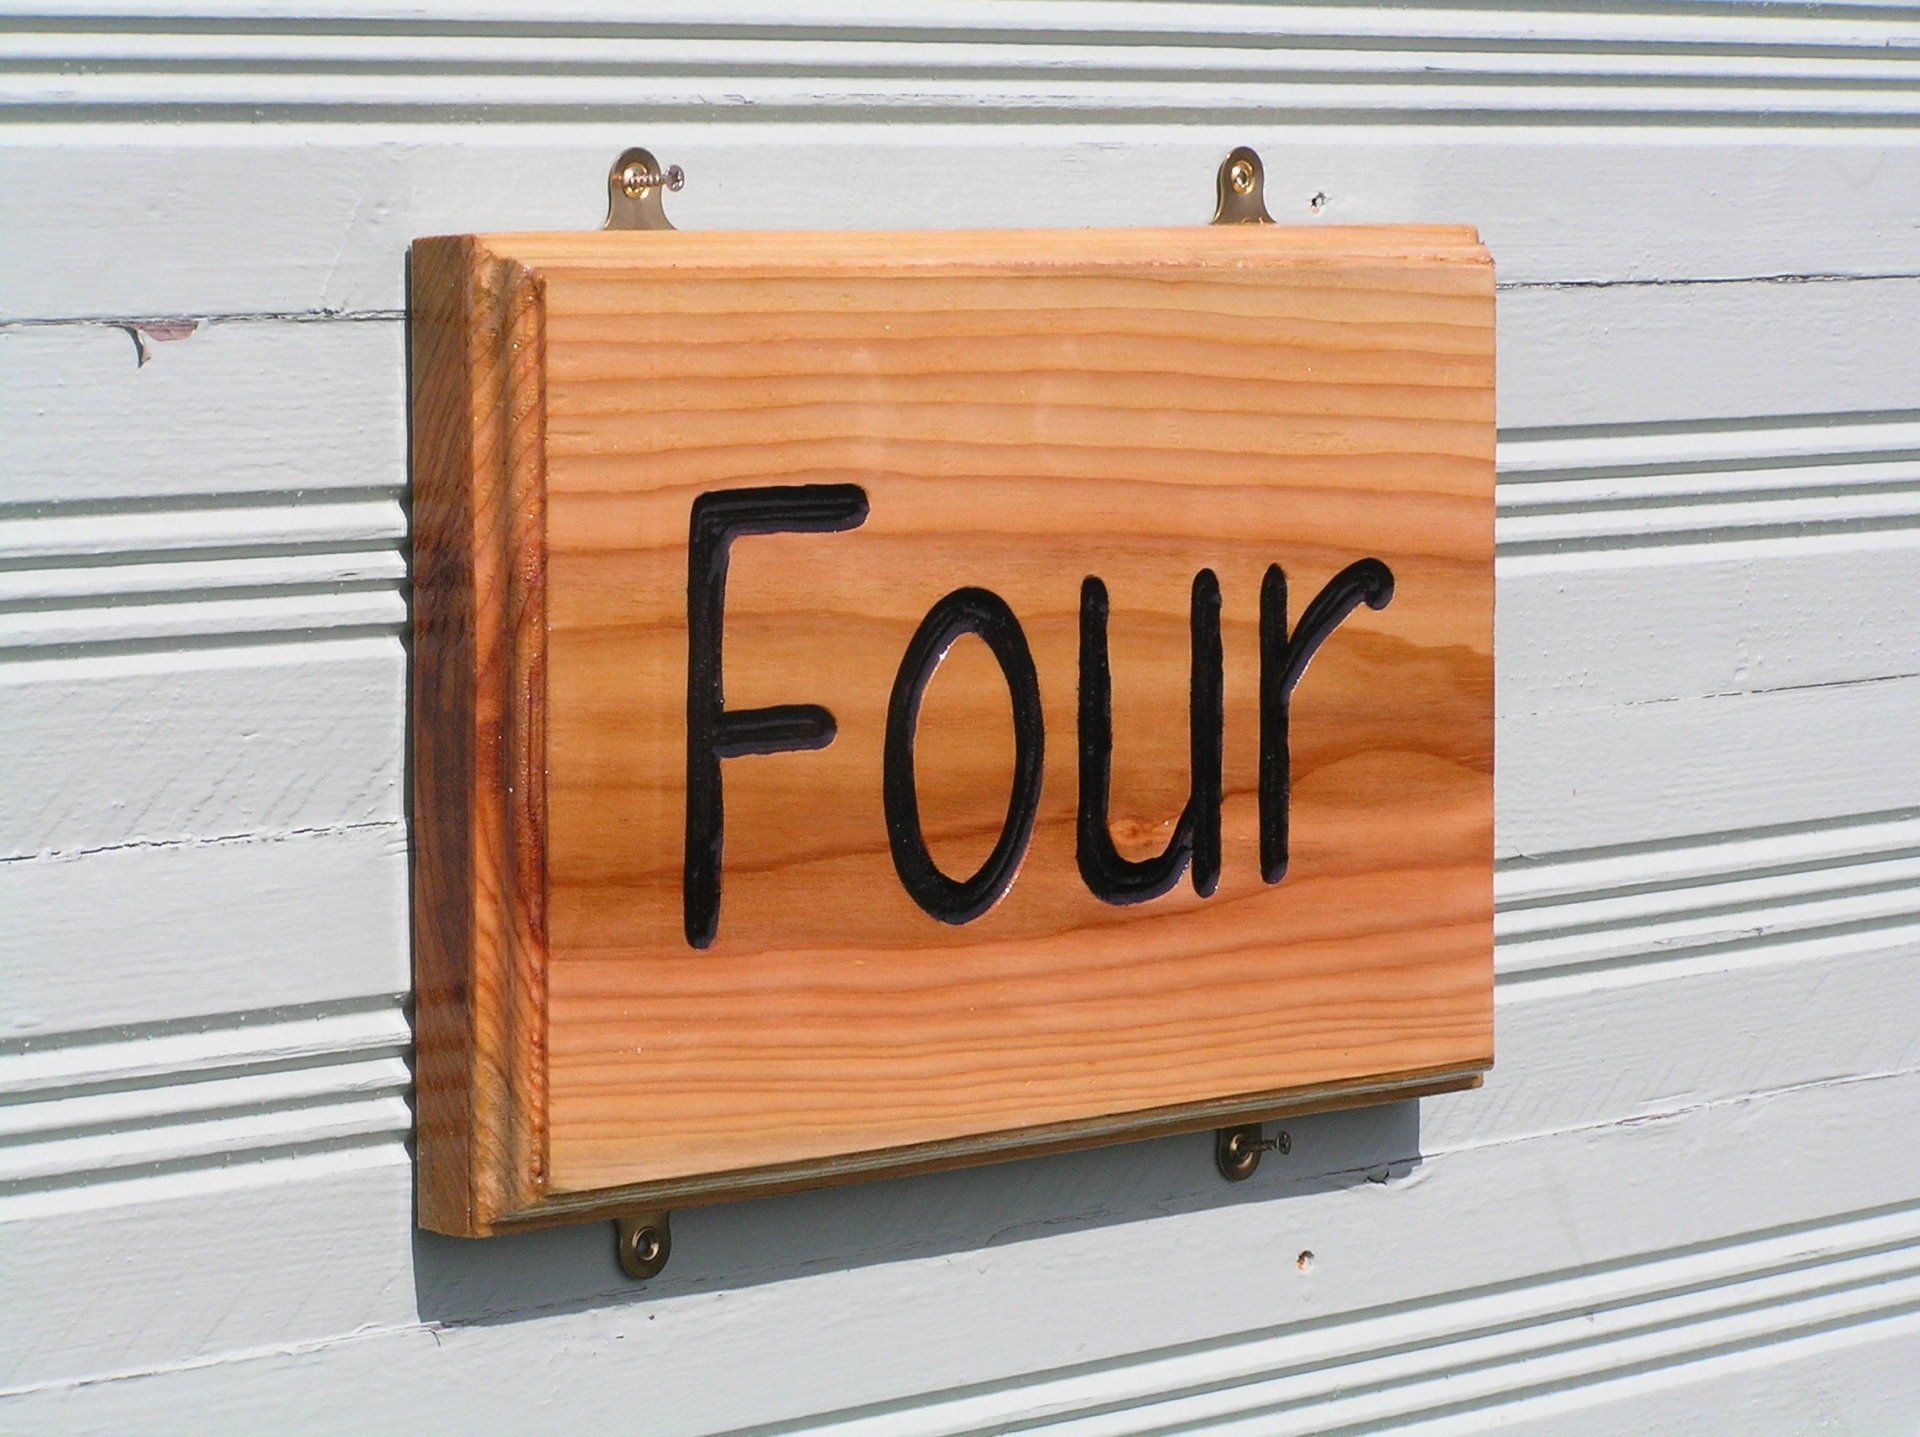 Sustainable wooden written number house sign by ingrained culture